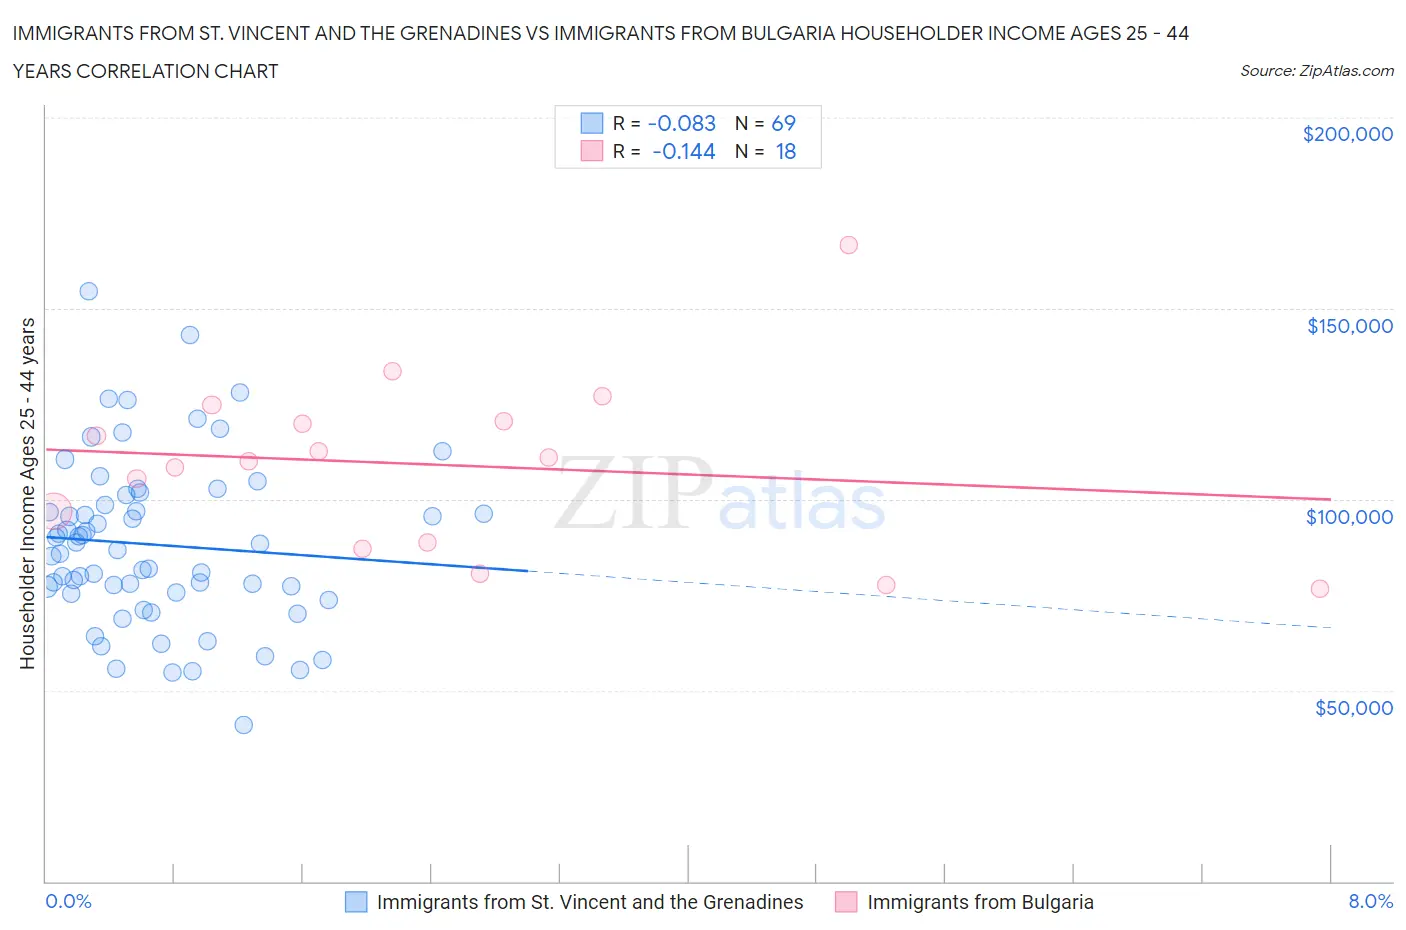 Immigrants from St. Vincent and the Grenadines vs Immigrants from Bulgaria Householder Income Ages 25 - 44 years